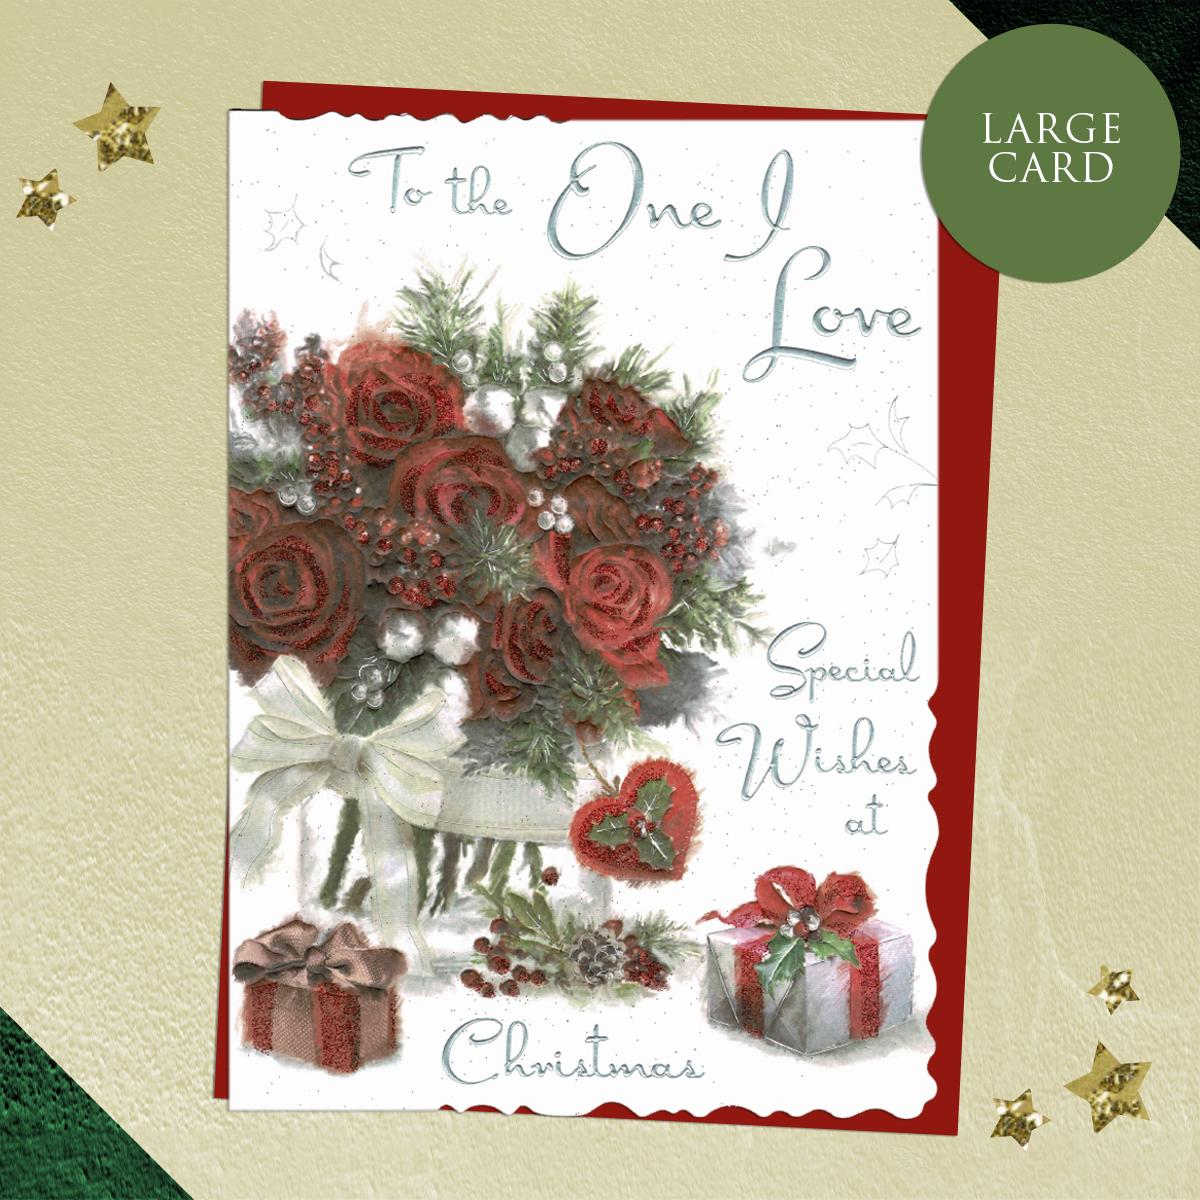 To The One I Love Red Roses Large Christmas Card. Featuring Res Rose Bouquet and Gifts. Enhanced With red Glitter and Silver lettering And Finished With a Red Envelope